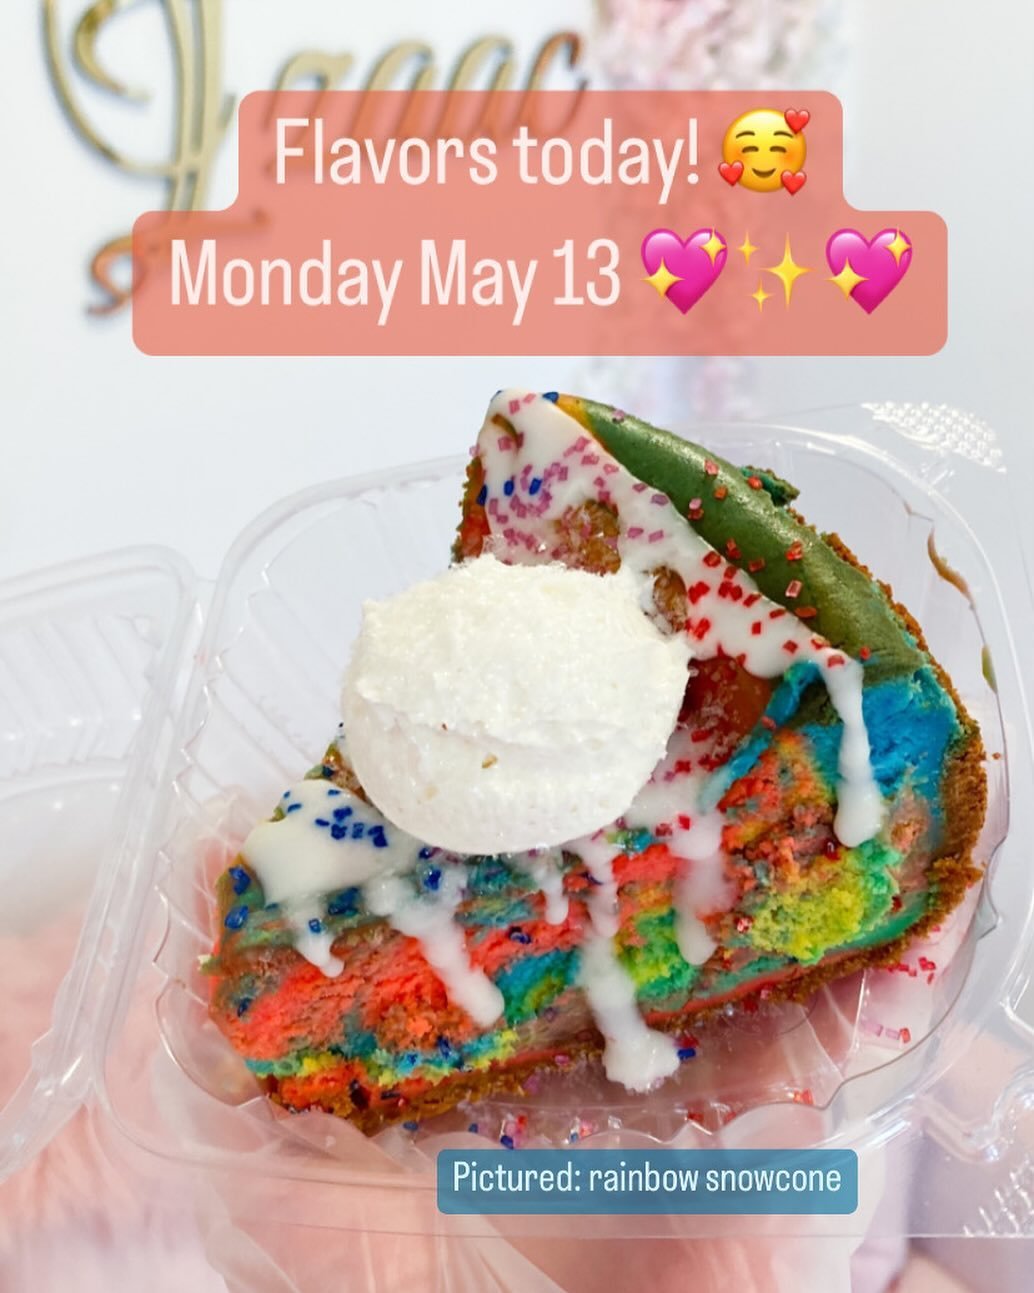 Happy Monday! 💖 We&rsquo;re all stocked and can&rsquo;t wait to see you! 🥰
Flavors ⤵️
Slices:
Key lime 
Butterscotch 
Boston creme
Cotton candy
Birthday cake
Rainbow snowcone 
Pumpkin chai
Frosted animal cookie 
Pi&ntilde;a colada
Strawberry mango 